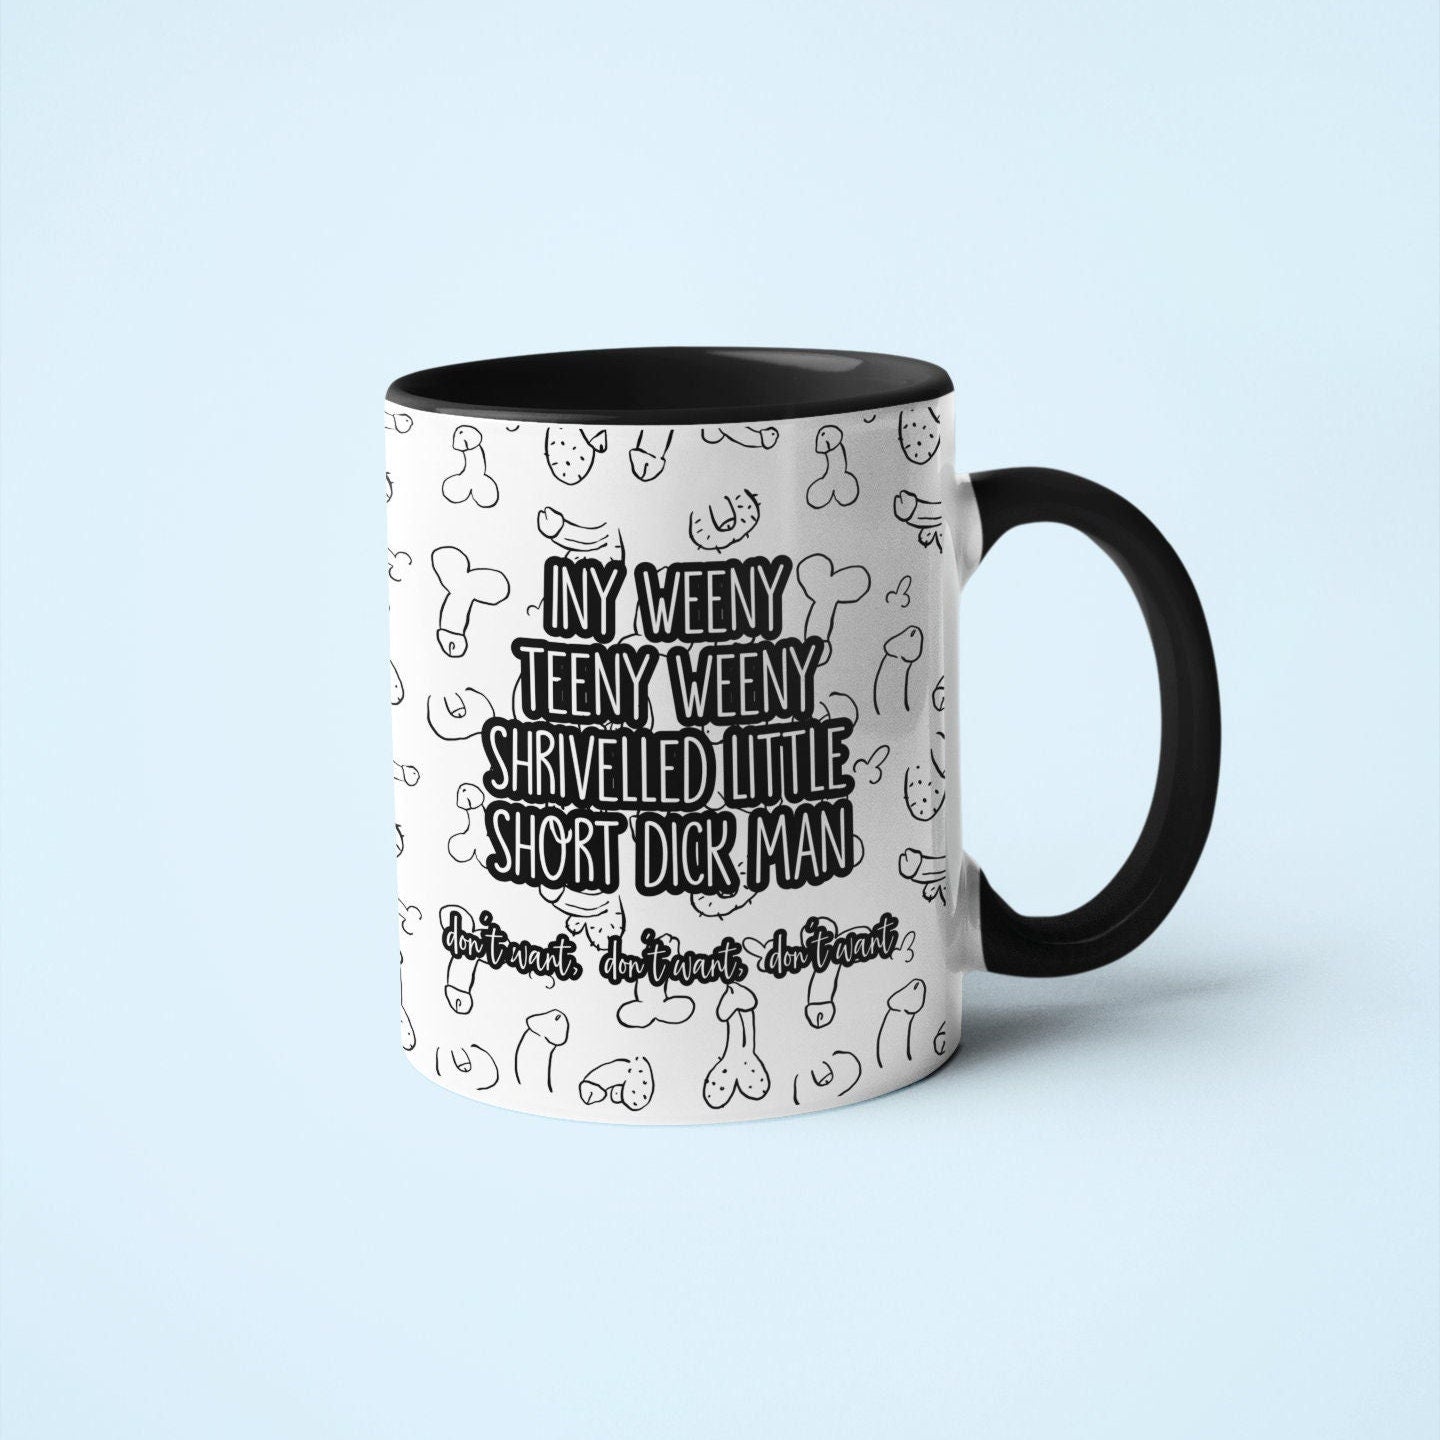 White mug with a black handle and rim, with a funny willy design printed throughout. Over the print it reads iny weeny teeny weeny shrivelled little short dick man.. don't want, don't want, don't want.